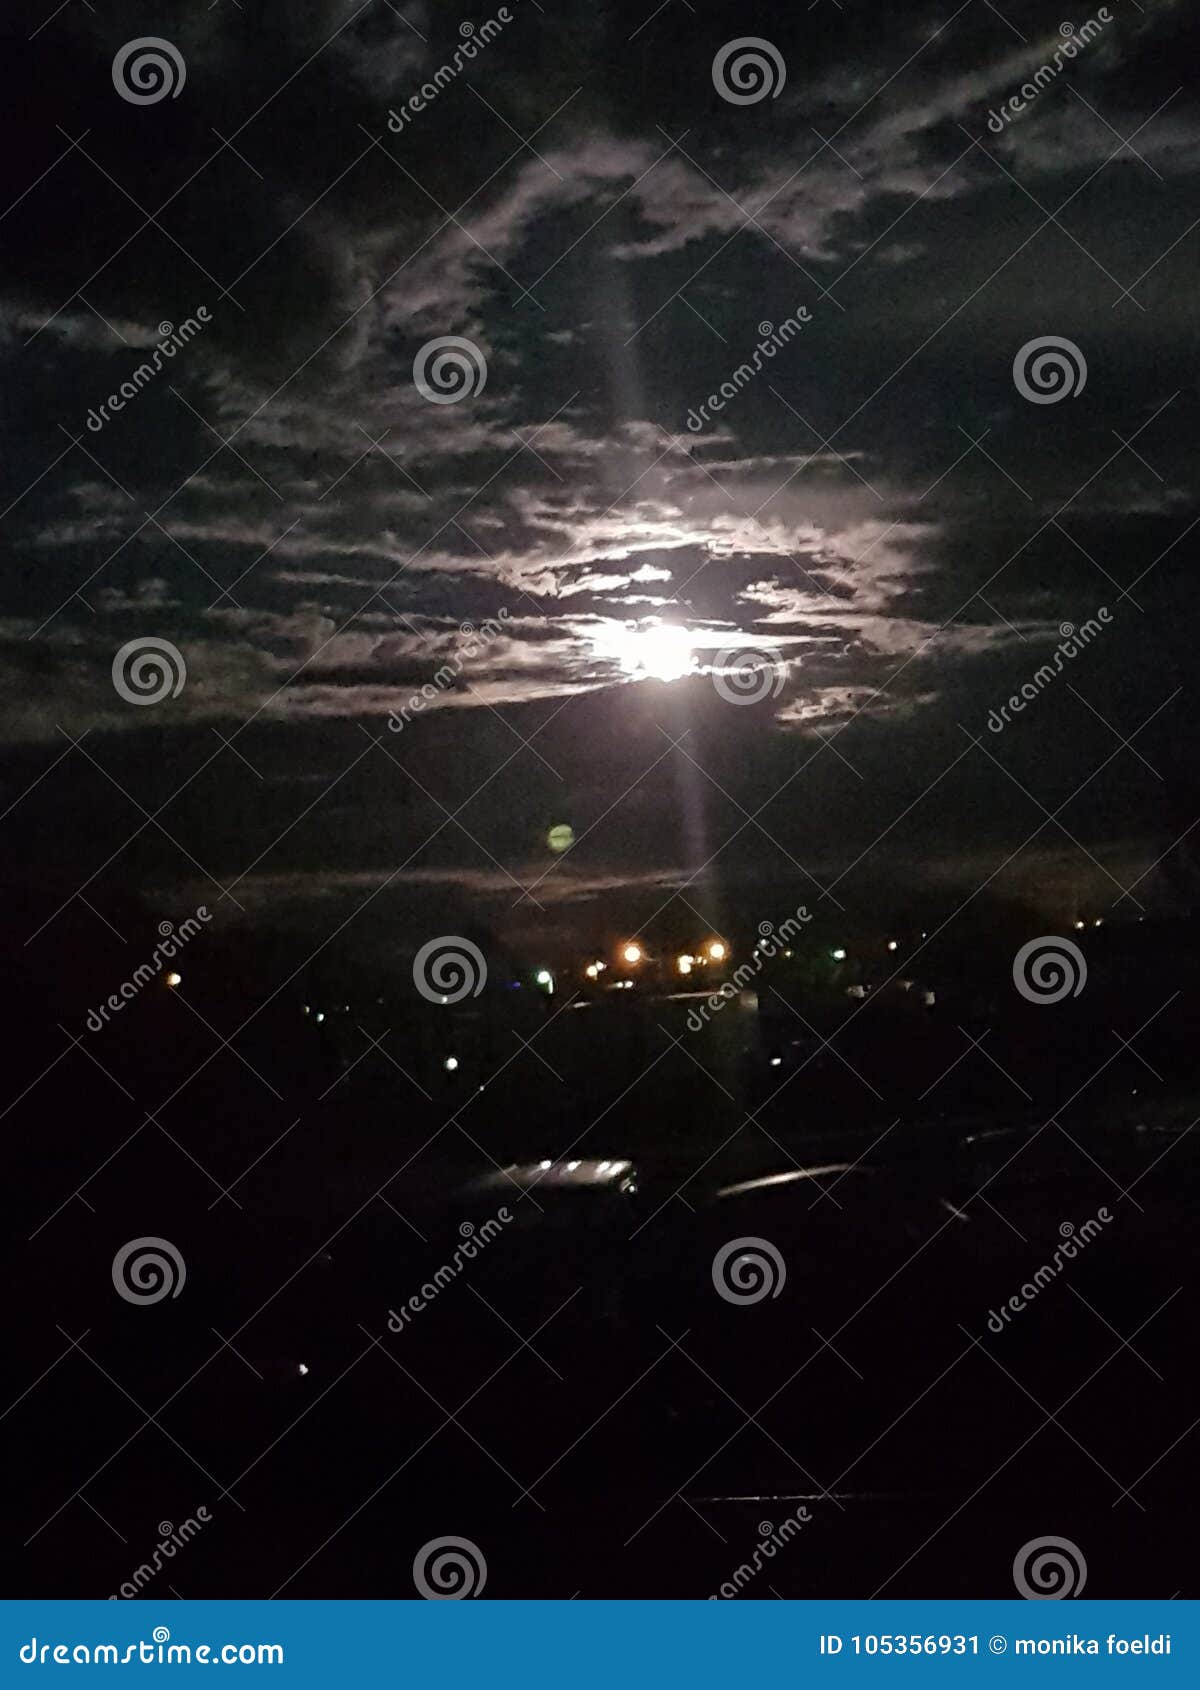 evening time in coober pedy moon is huge magnificent extraordinary